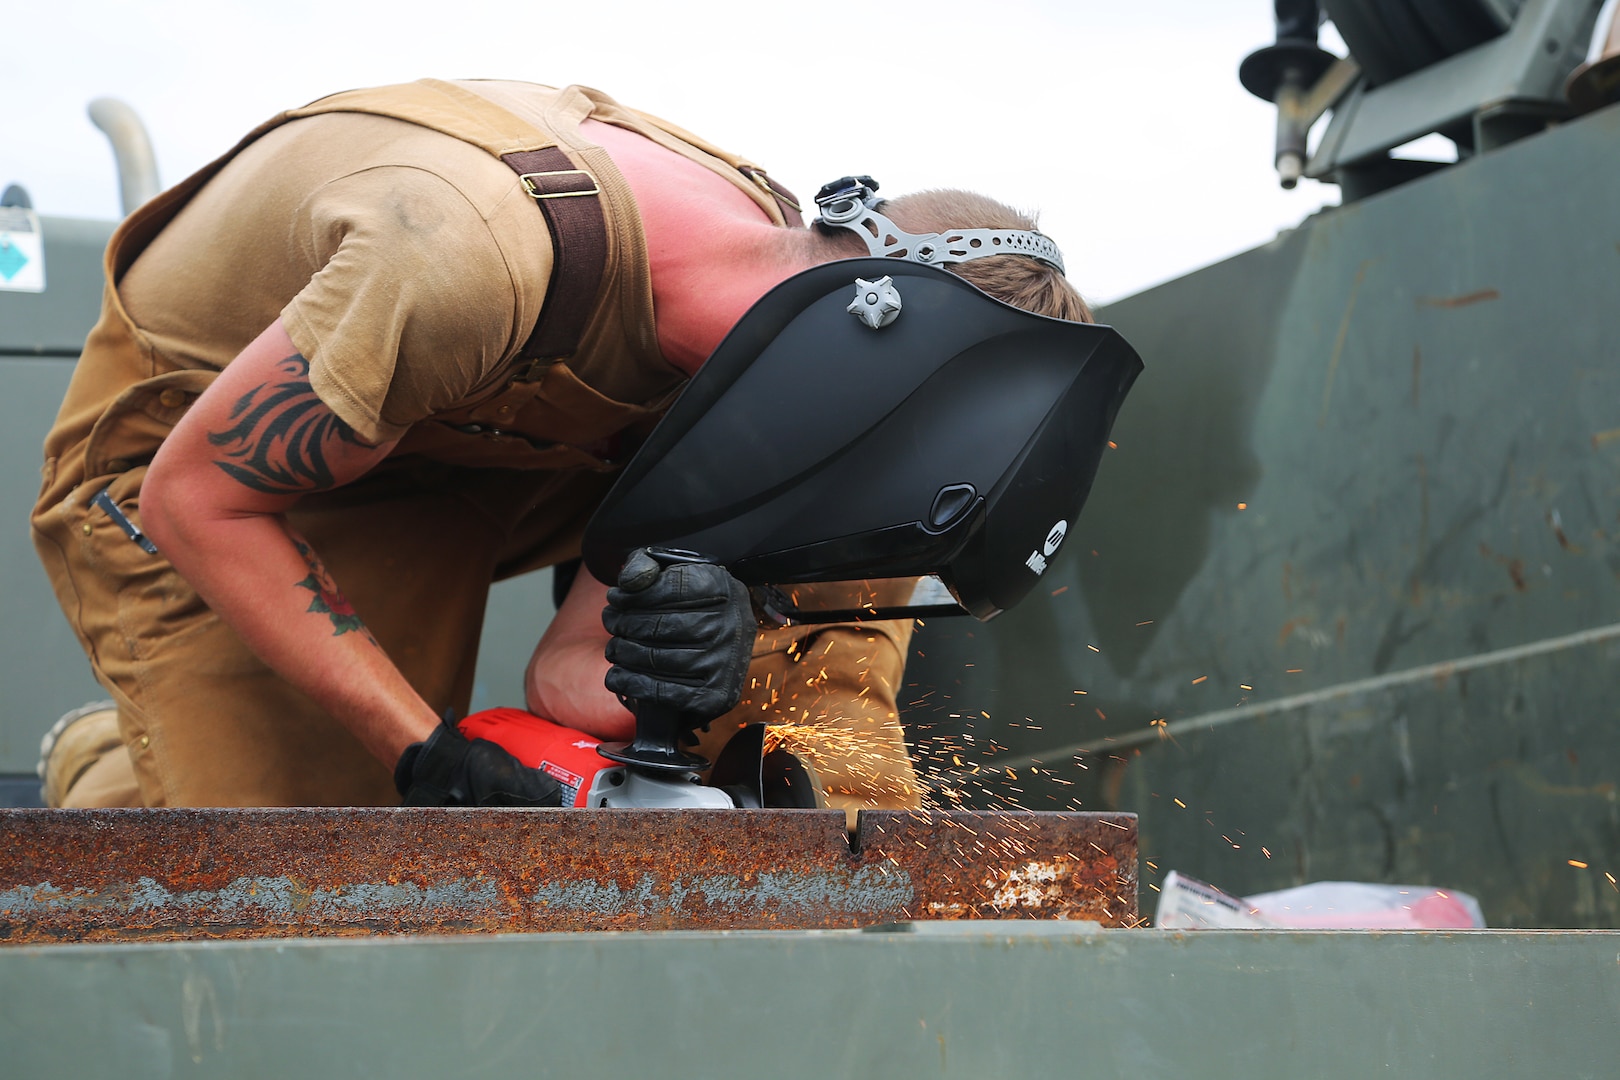 A U.S. Navy Steelworker cuts metal during water well drilling exploration site set up in Riohacha, Colombia.